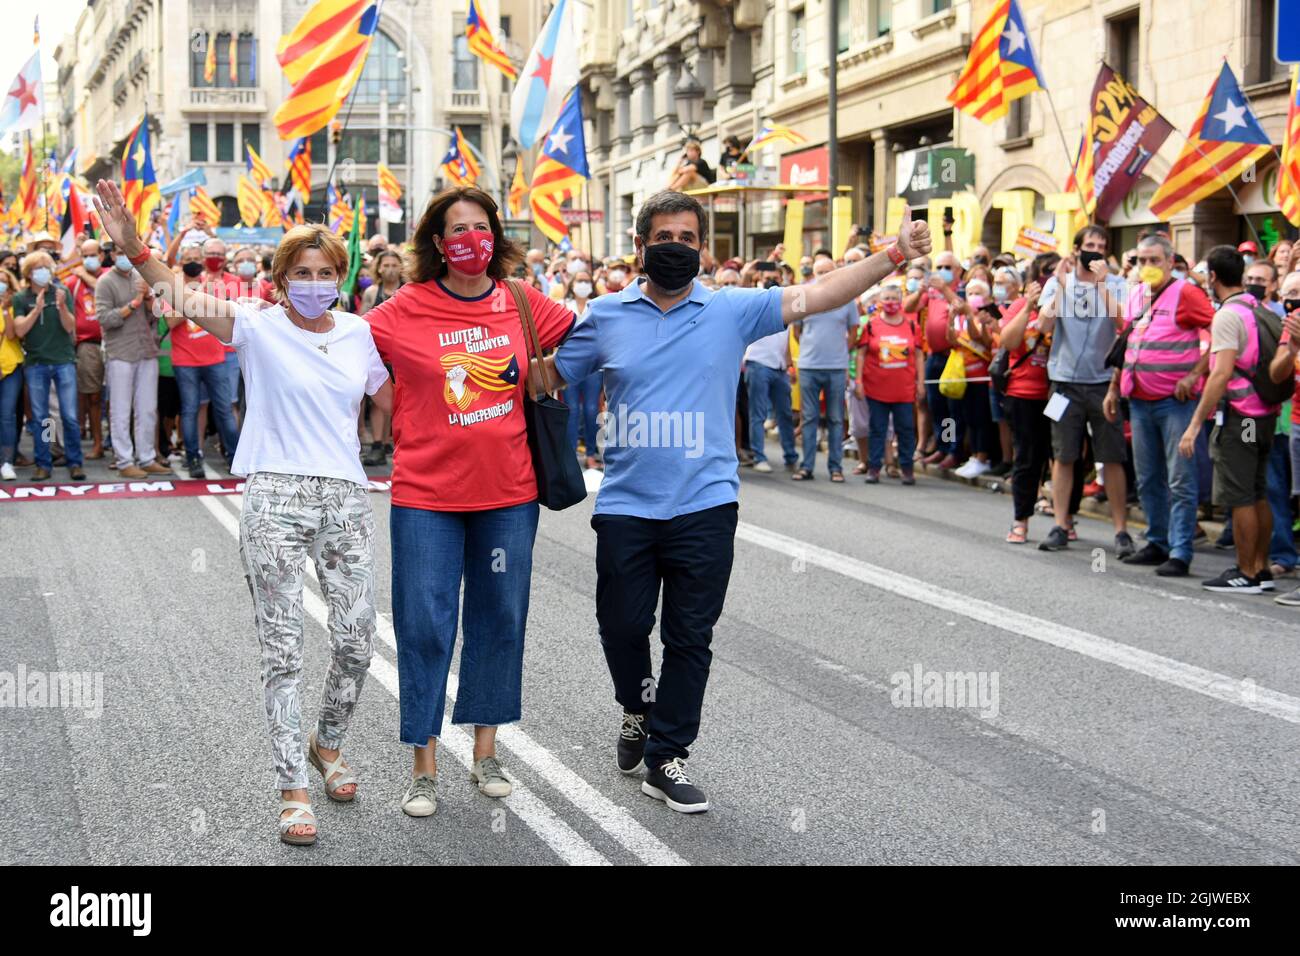 Barcelona, Spain. 11th Sep, 2021. The President of the Catalan National Assembly (ANC) Elisenda Paluzie (Center) with the two former presidents of the ANC Carme Forcadell (R) and Jordi Sánchez (L) seen during the demonstration of the National Day of Catalonia.400.000 people according to the Catalan National Assembly (ANC) and 108,000 according to the Local Police demonstrate in Barcelona on the National Day of Catalonia to demand Independence. Credit: SOPA Images Limited/Alamy Live News Stock Photo